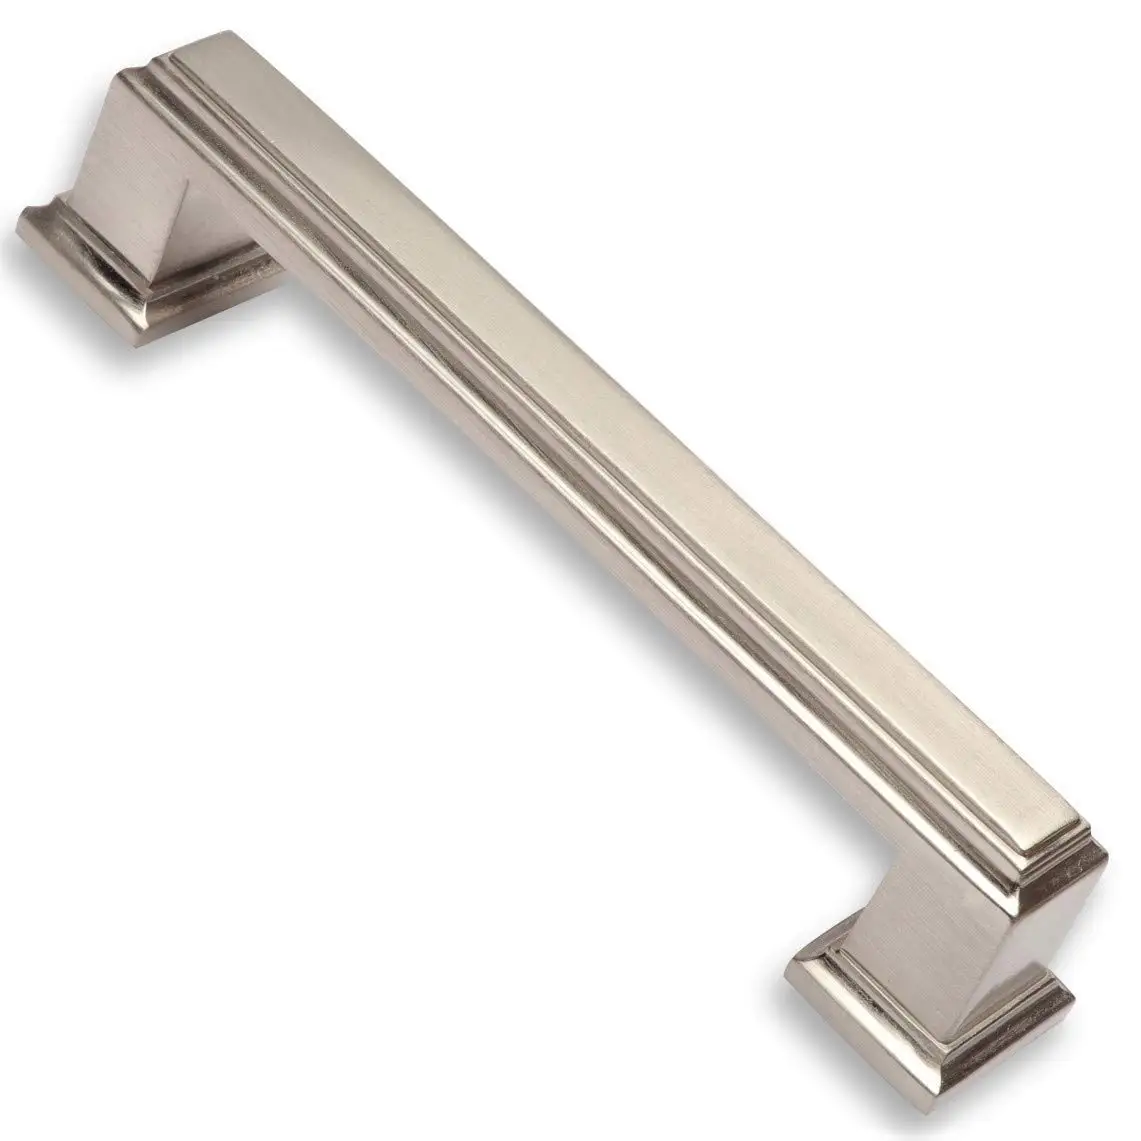 3 in brushed nickel cabinet pulls